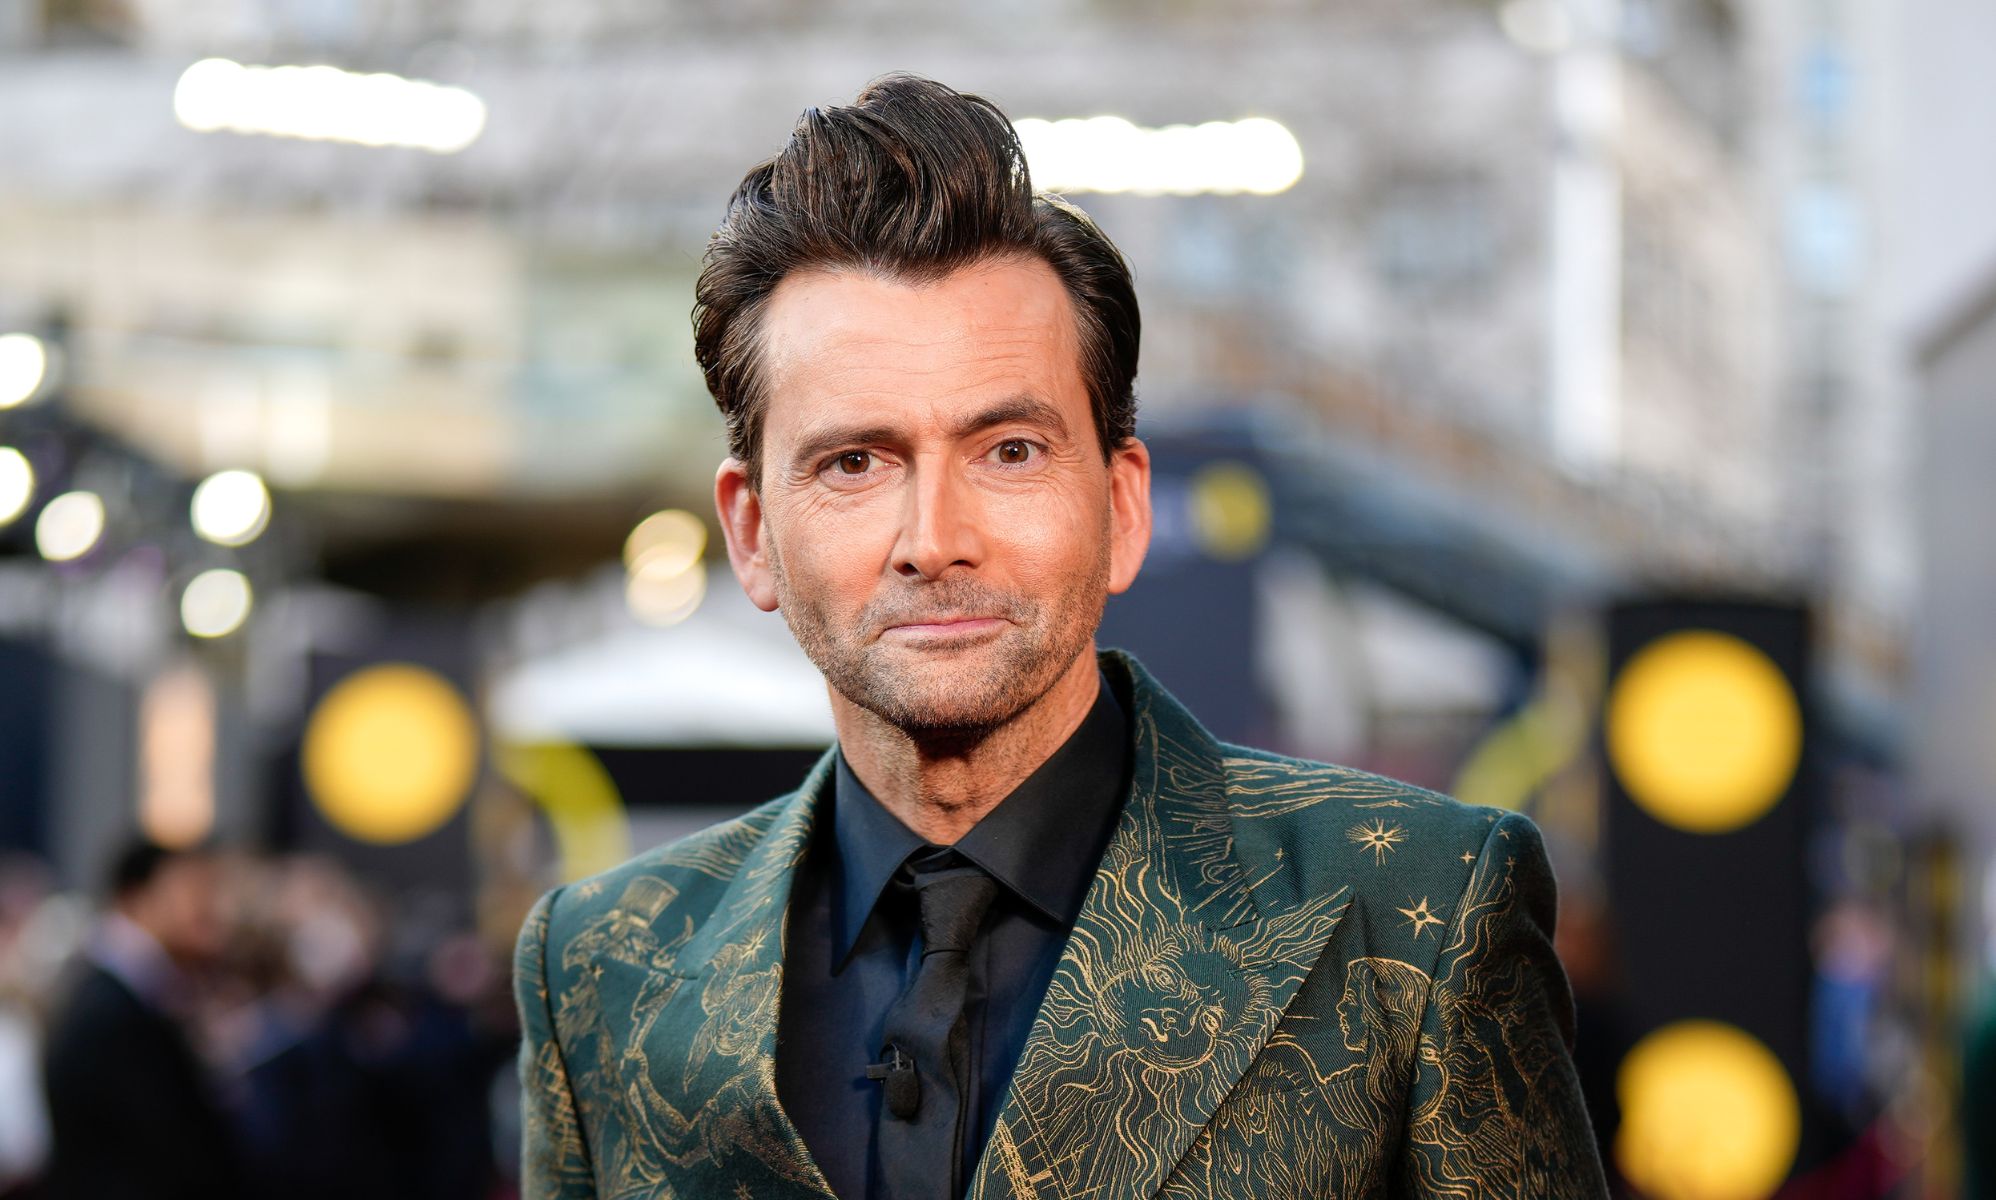 David Tennant: 'F**k off and let people be'